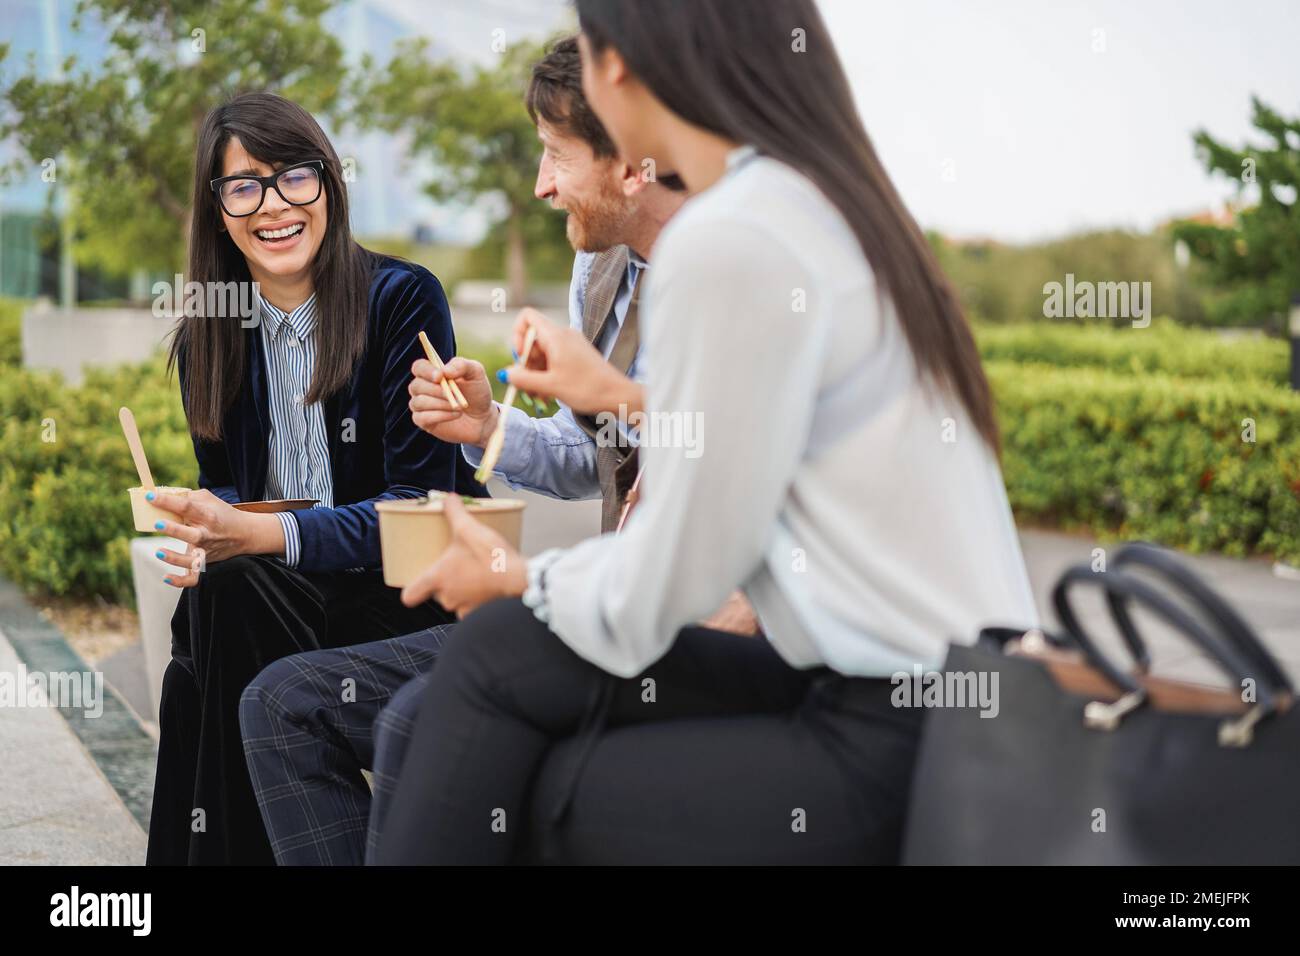 business people doing lunch break outdoor from office building - Focus on left girl face Stock Photo